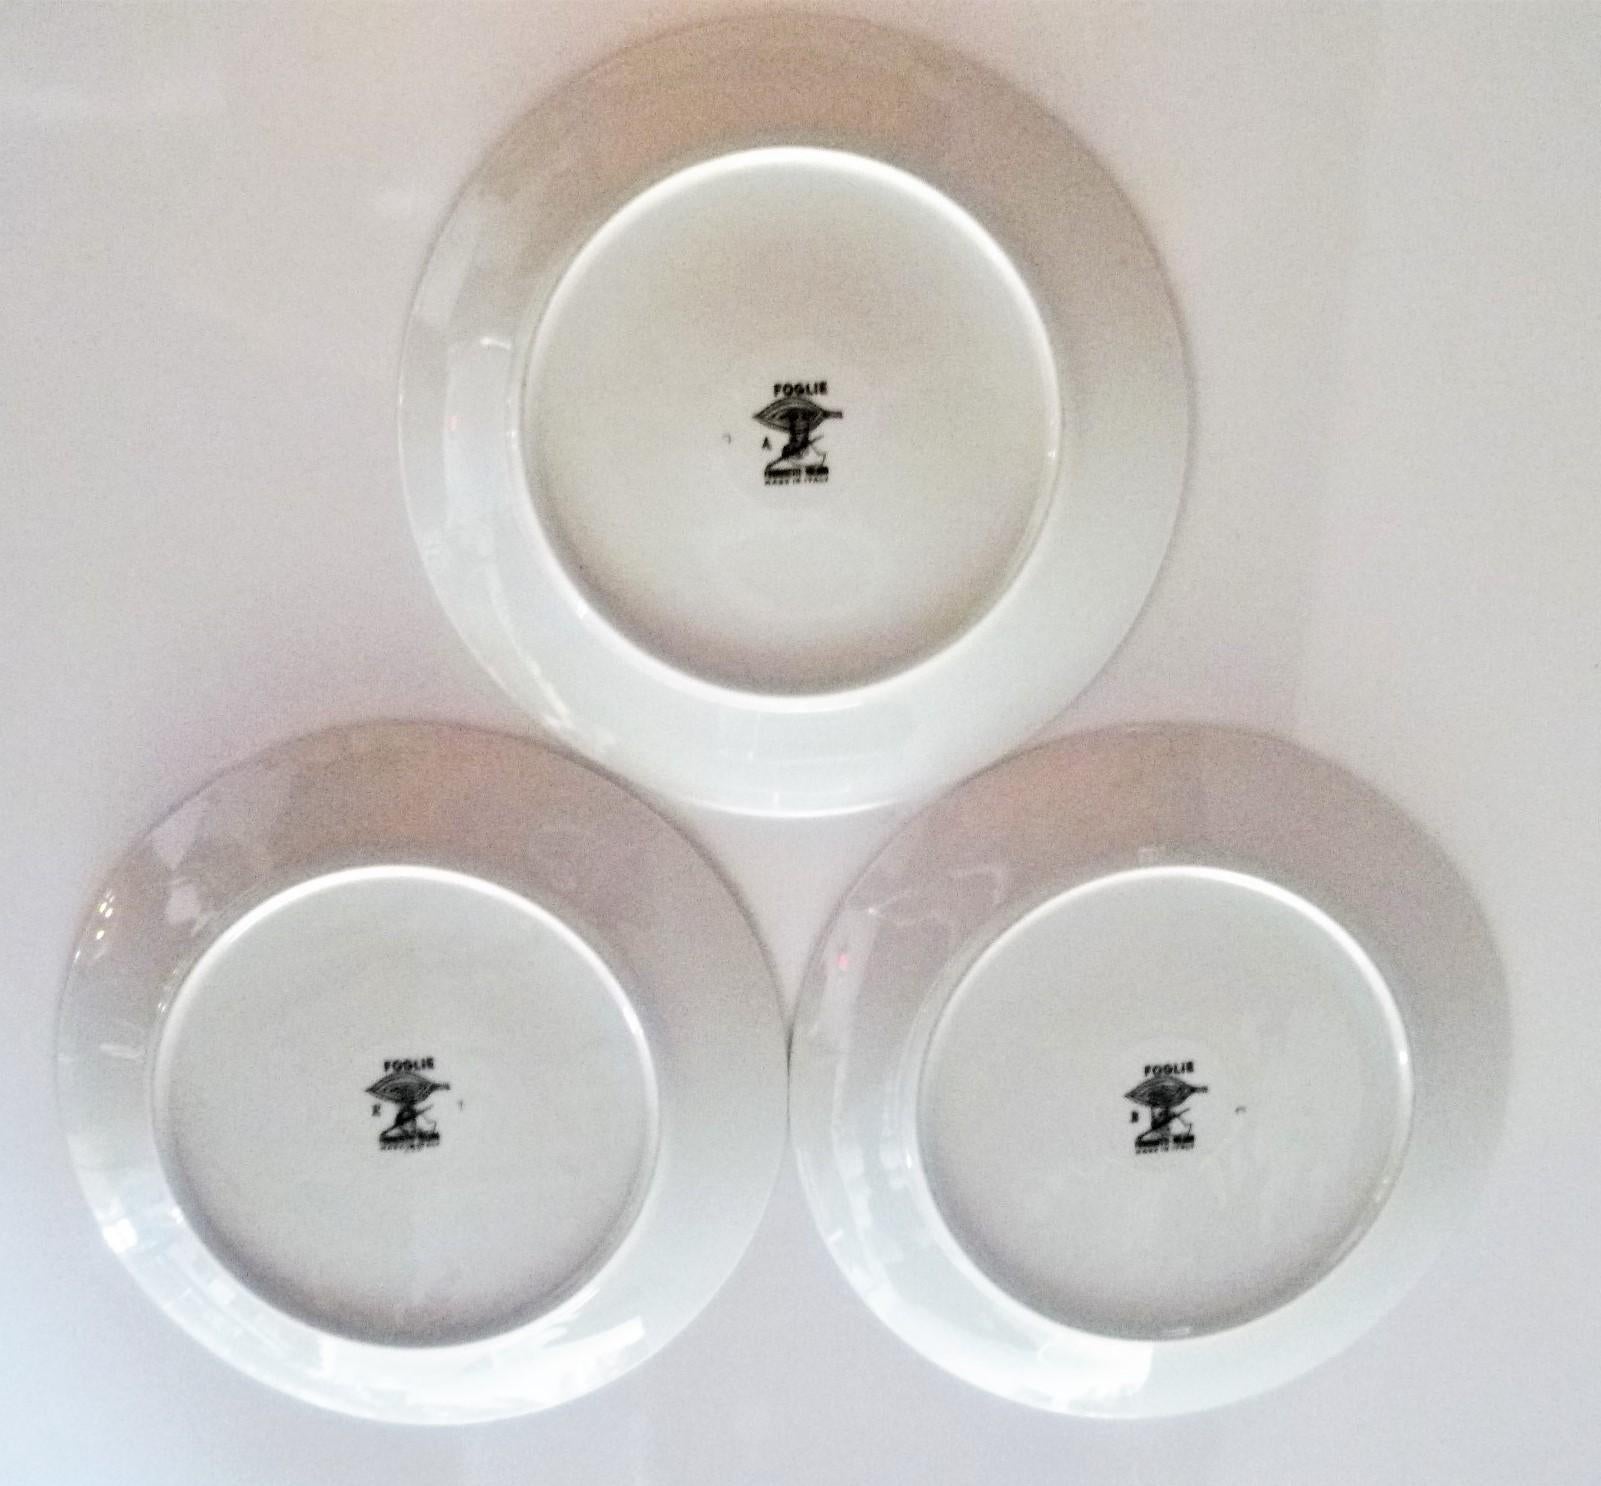 REDUCED FROM $900....Set of three black and white porcelain Foglie or Foilage plates by Piero Fornasetti for Fornasetti Atelier in Milan from the 1950s. Each depicting beautifully three different leaves. The two plates with the larger black leaves,